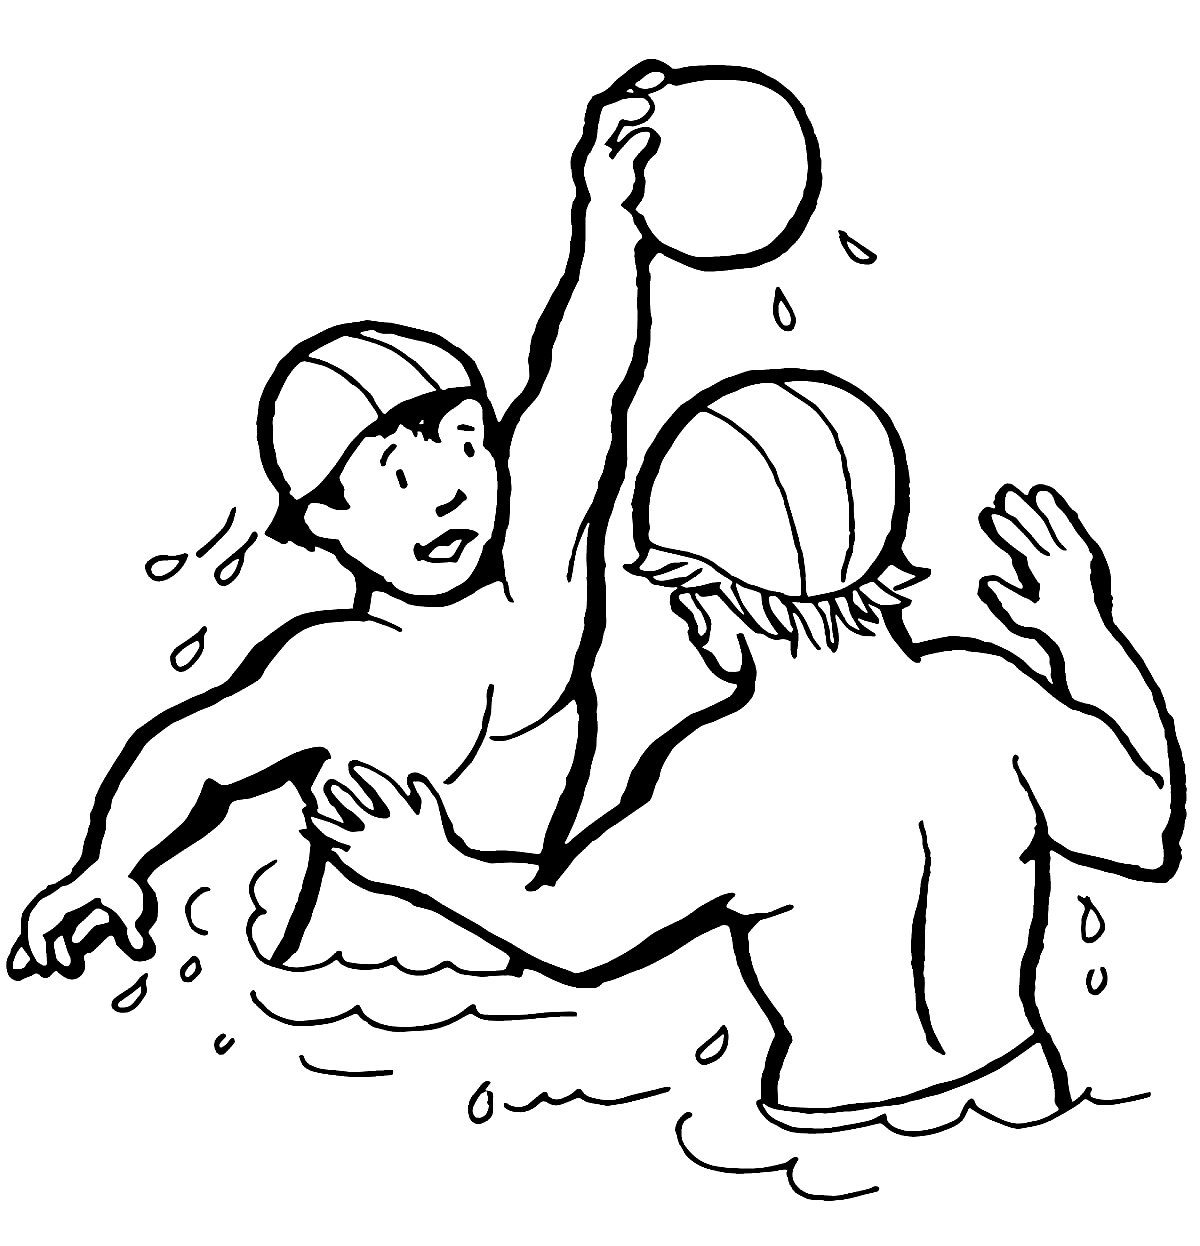 Kids Playing Water Polo from Water Sports